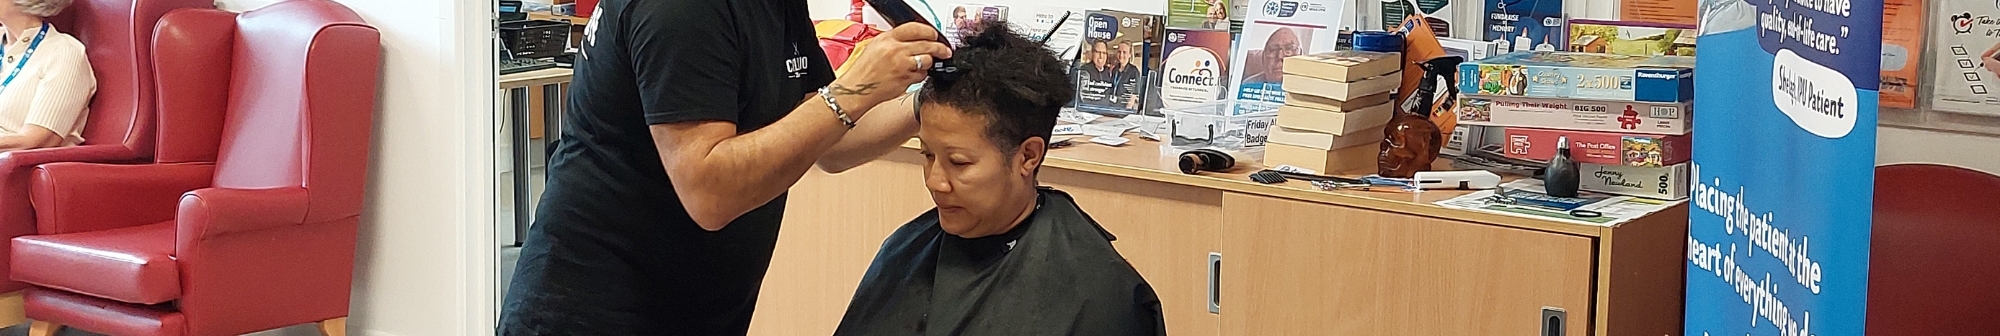 althea-getting-her-head-shaved-at-the-hospice